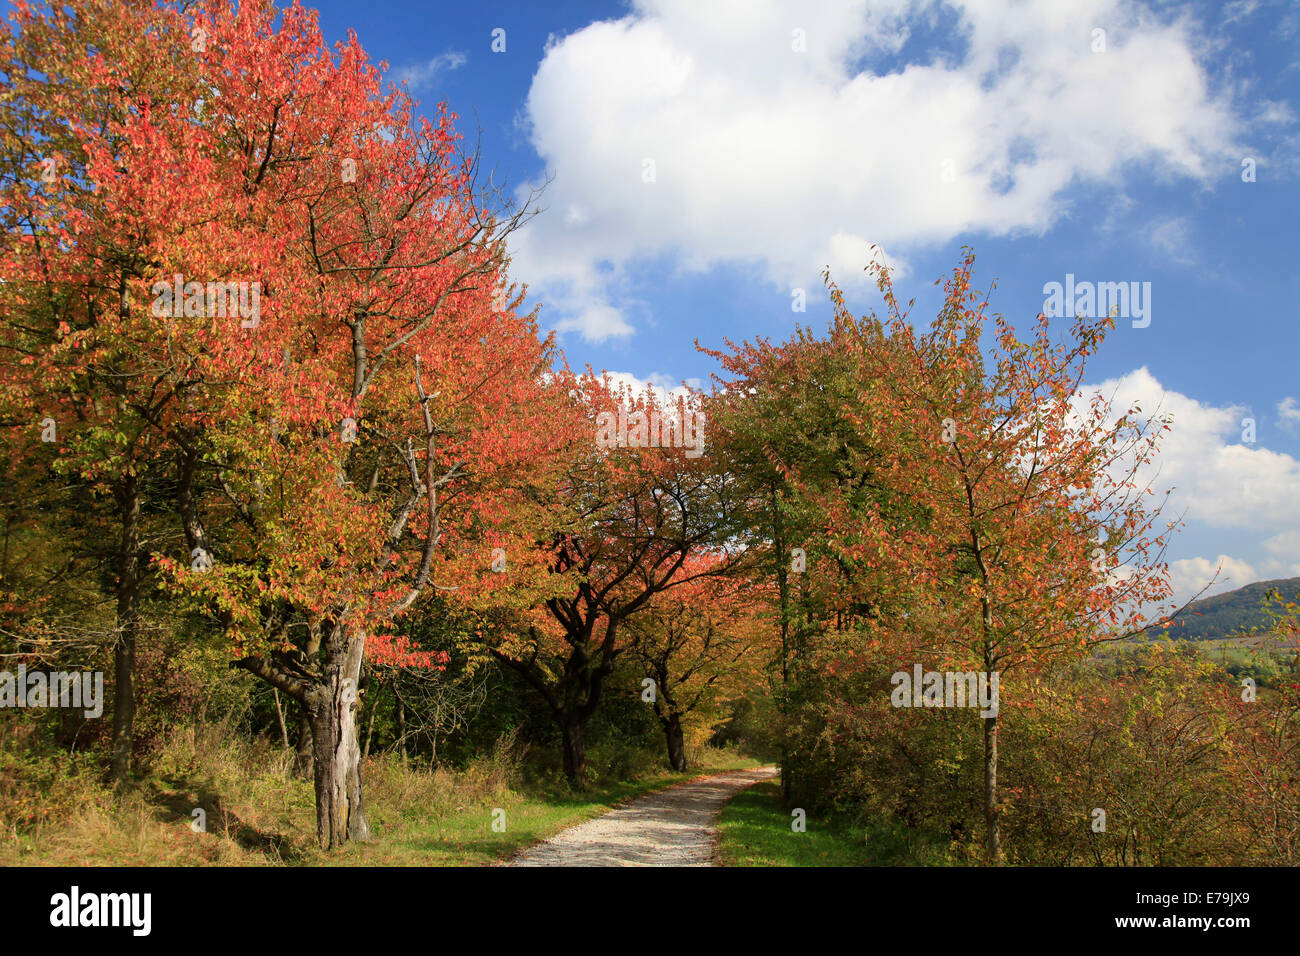 Colorful autumn leaves on the trees in the Rhoen near Wiesenthal. Photo: Klaus Nowottnick Date: October 9, 2012 Stock Photo